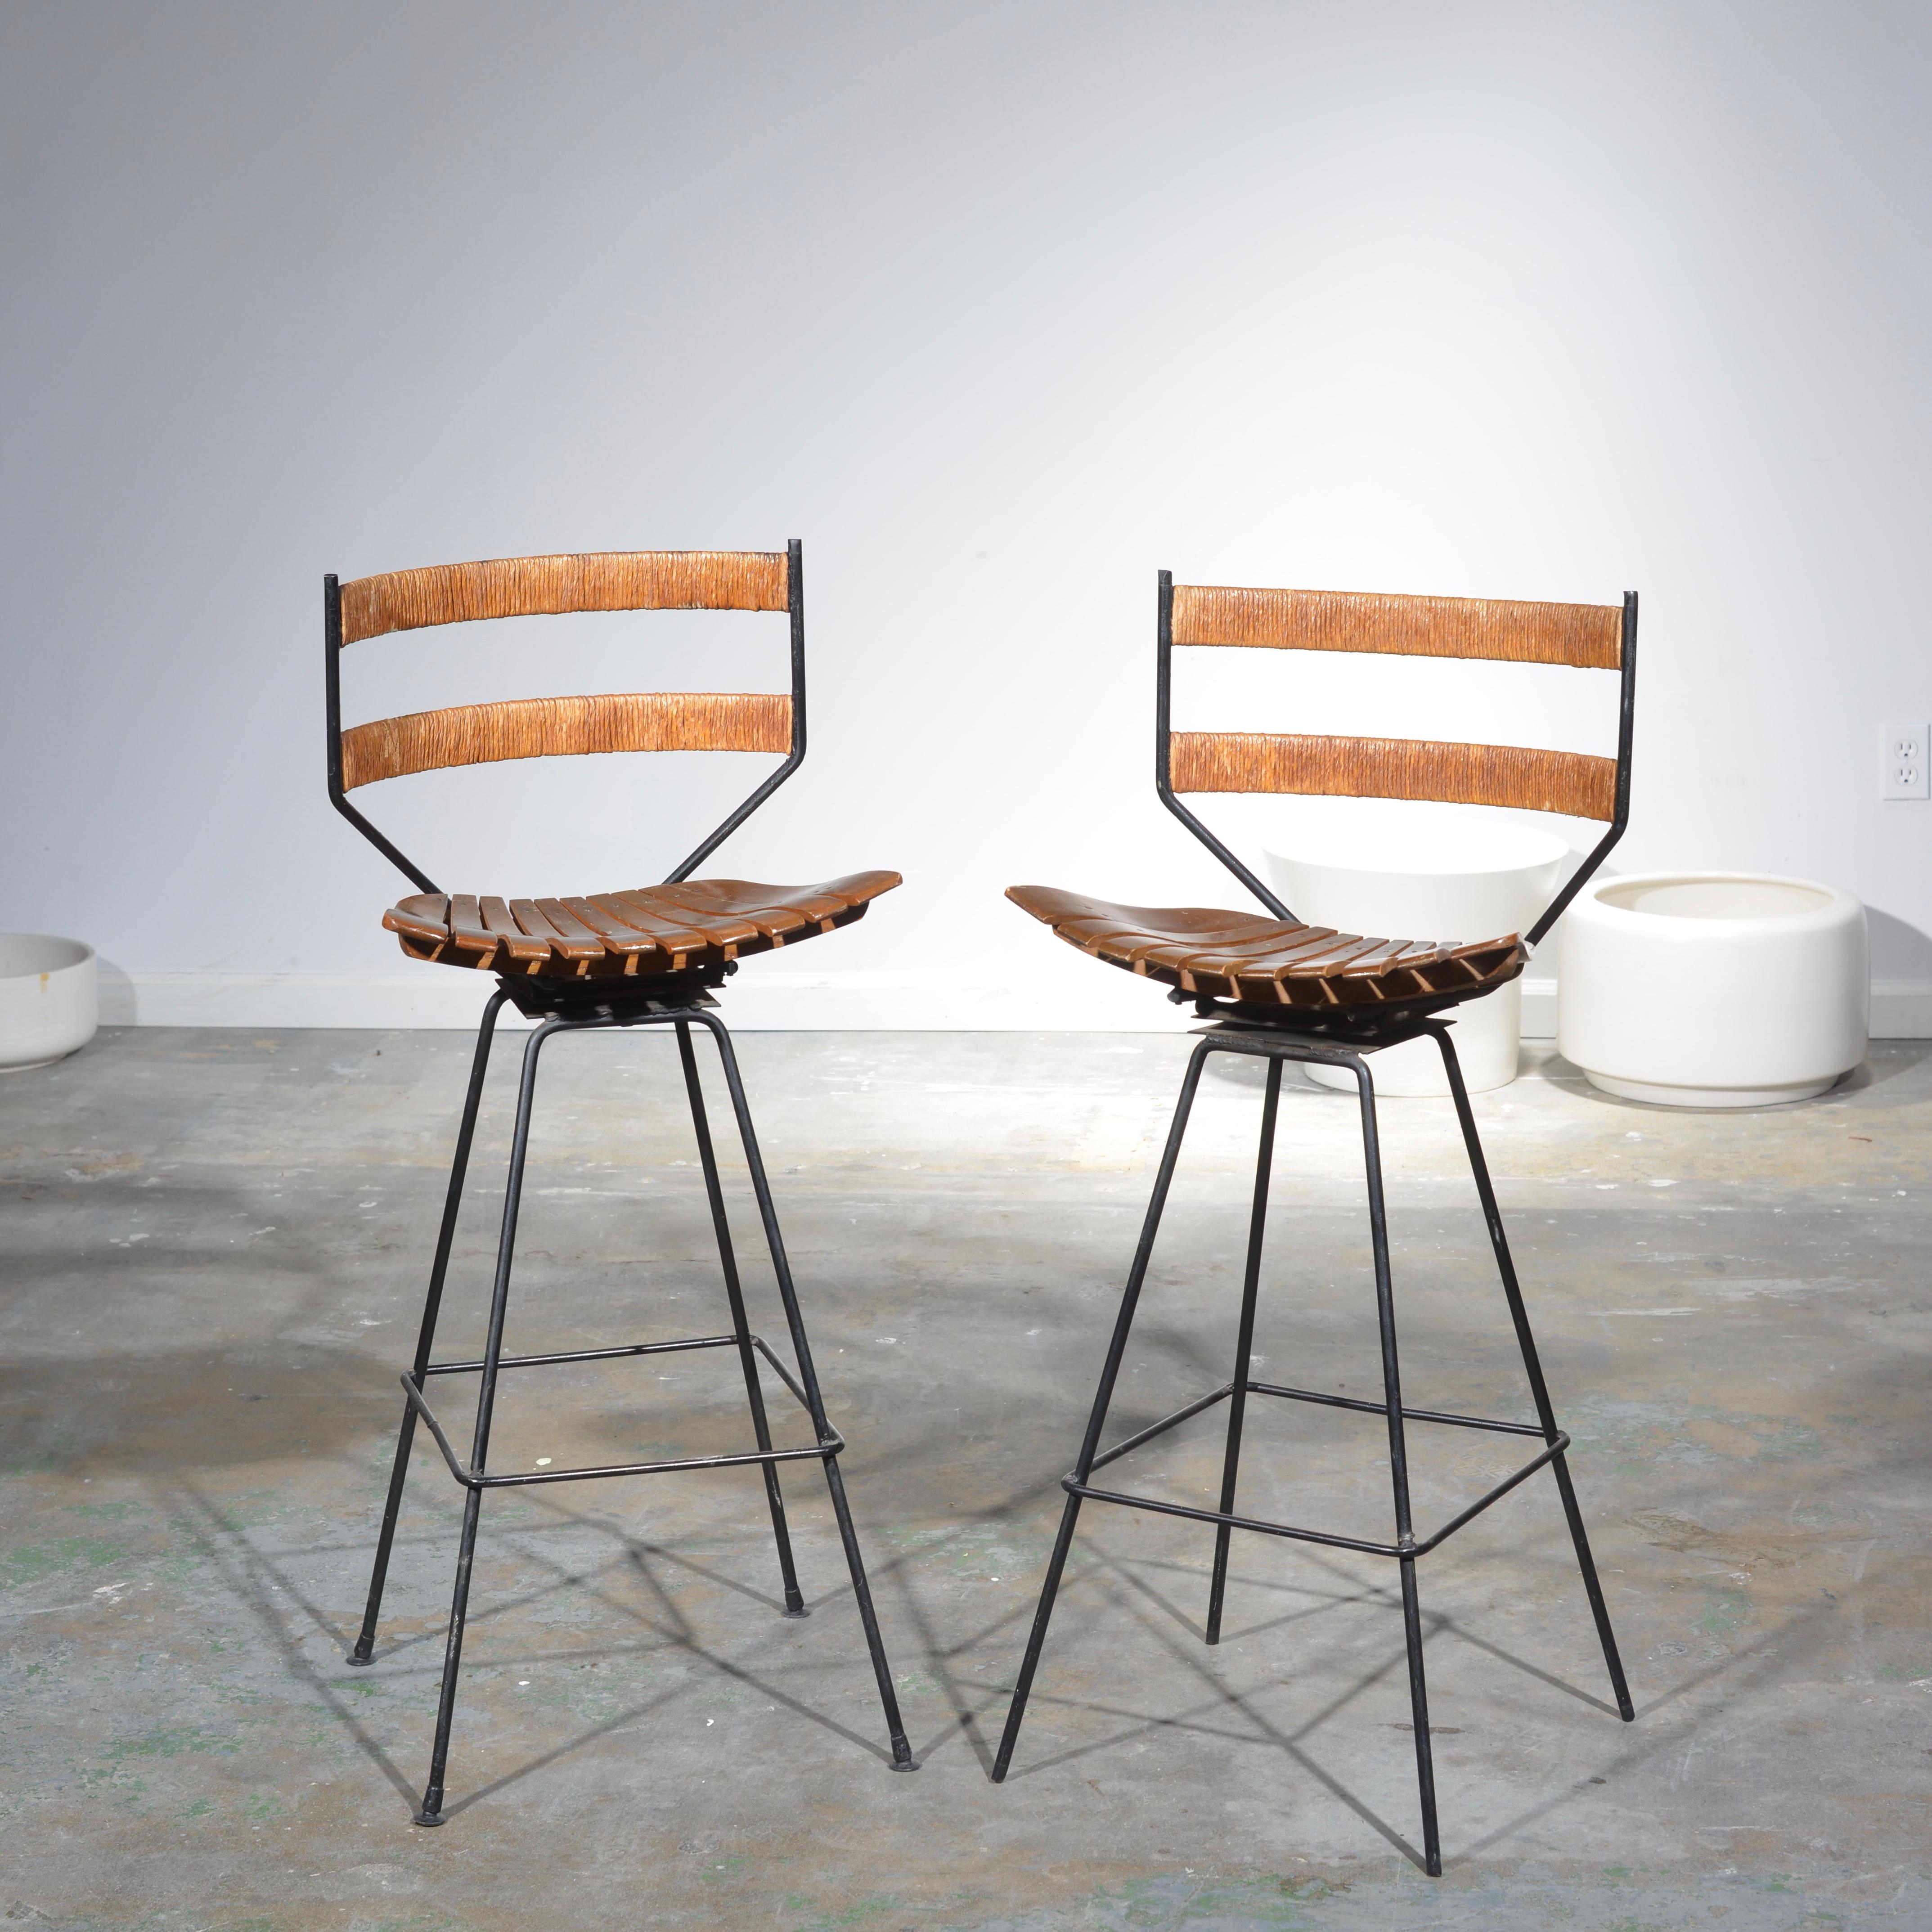 Rare pair of Arthur Umanoff for Shaver Howard wrought iron, rope and birch seat bar stools.